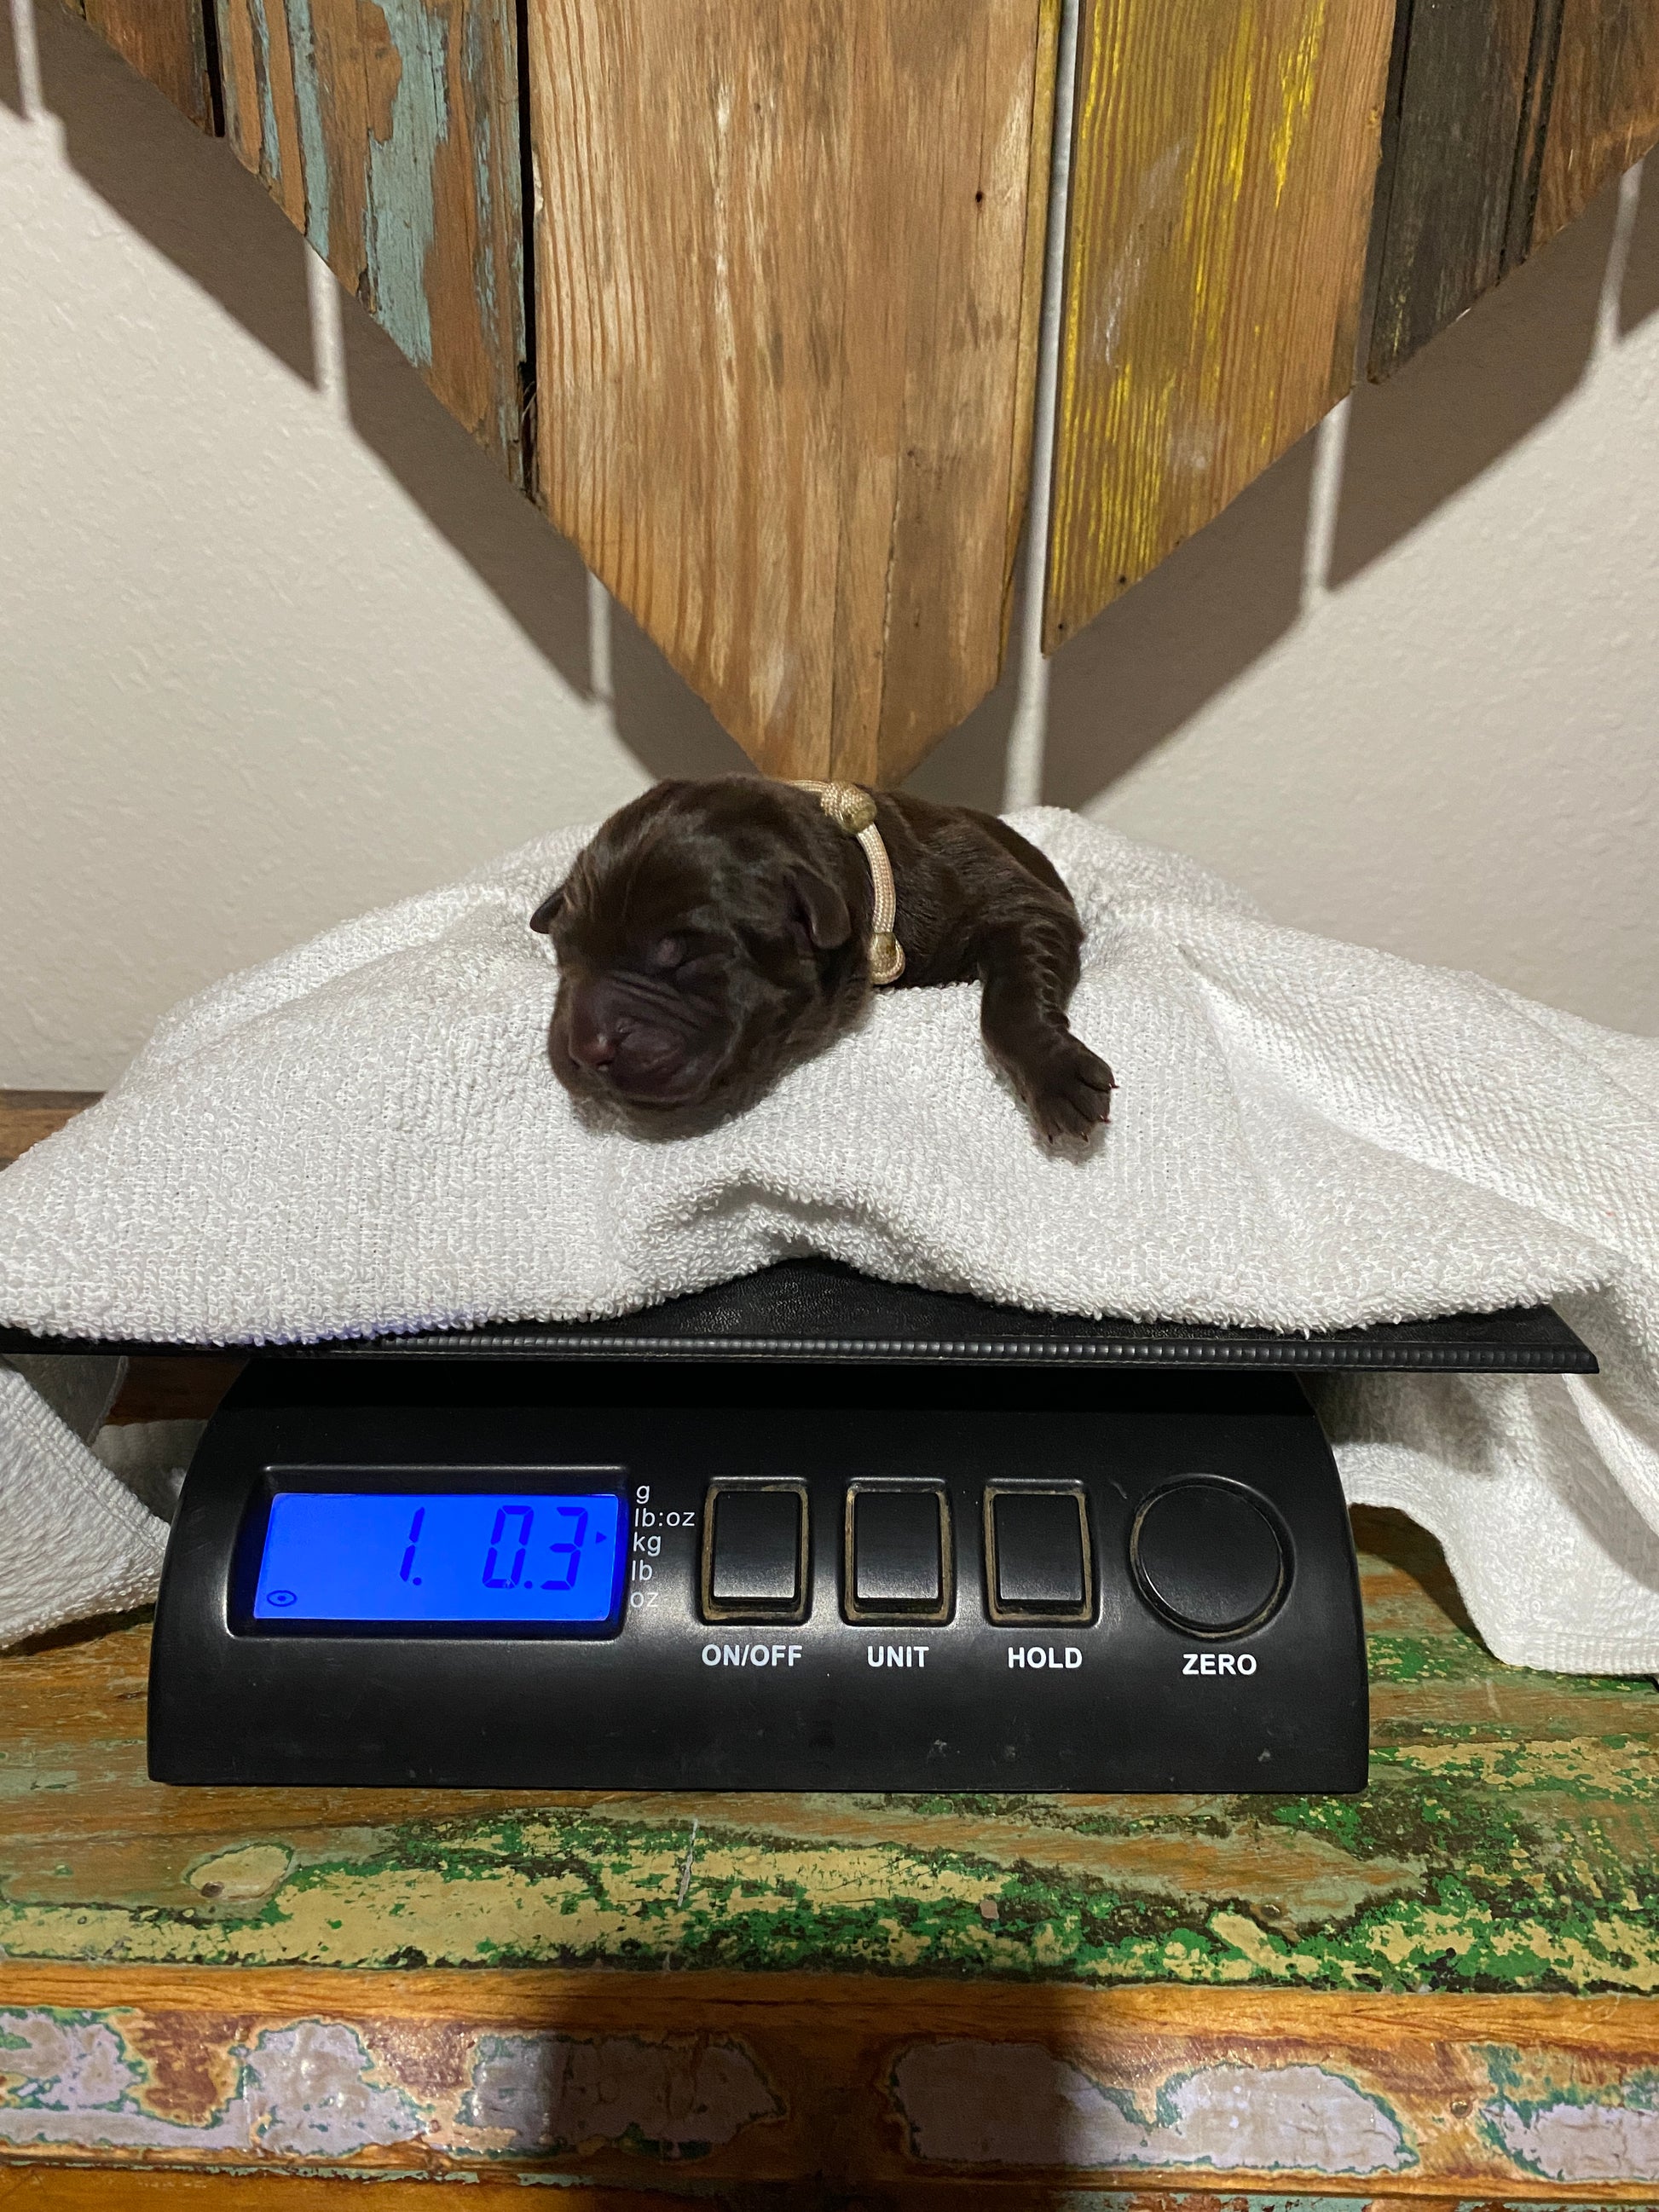 Picture of Chocolate Labrador puppy Almond Joy on a scale being weighed